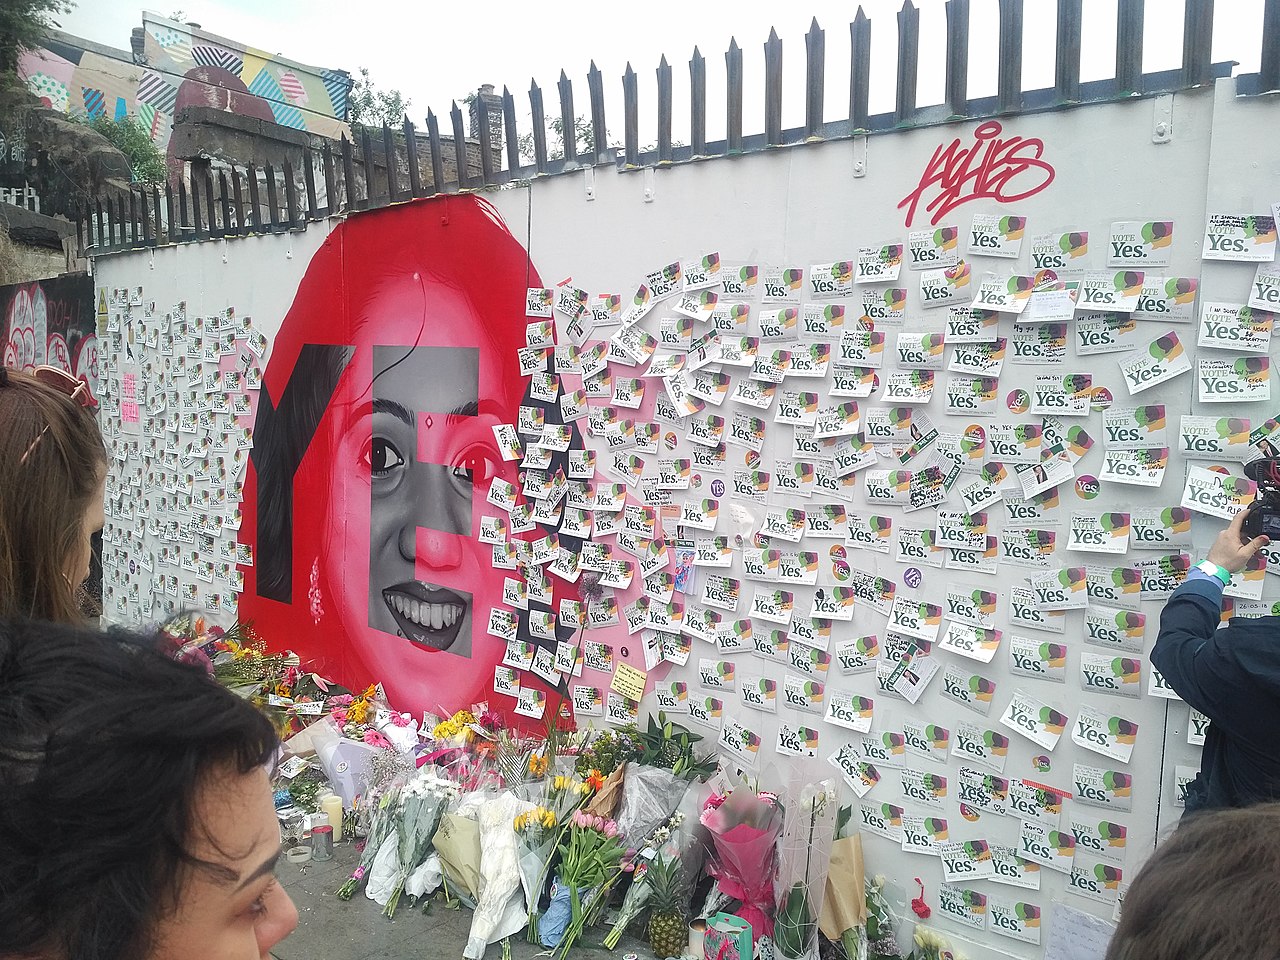 Poland: Pregnant woman dies of septic shock in case with echoes of Savita Halappanavar